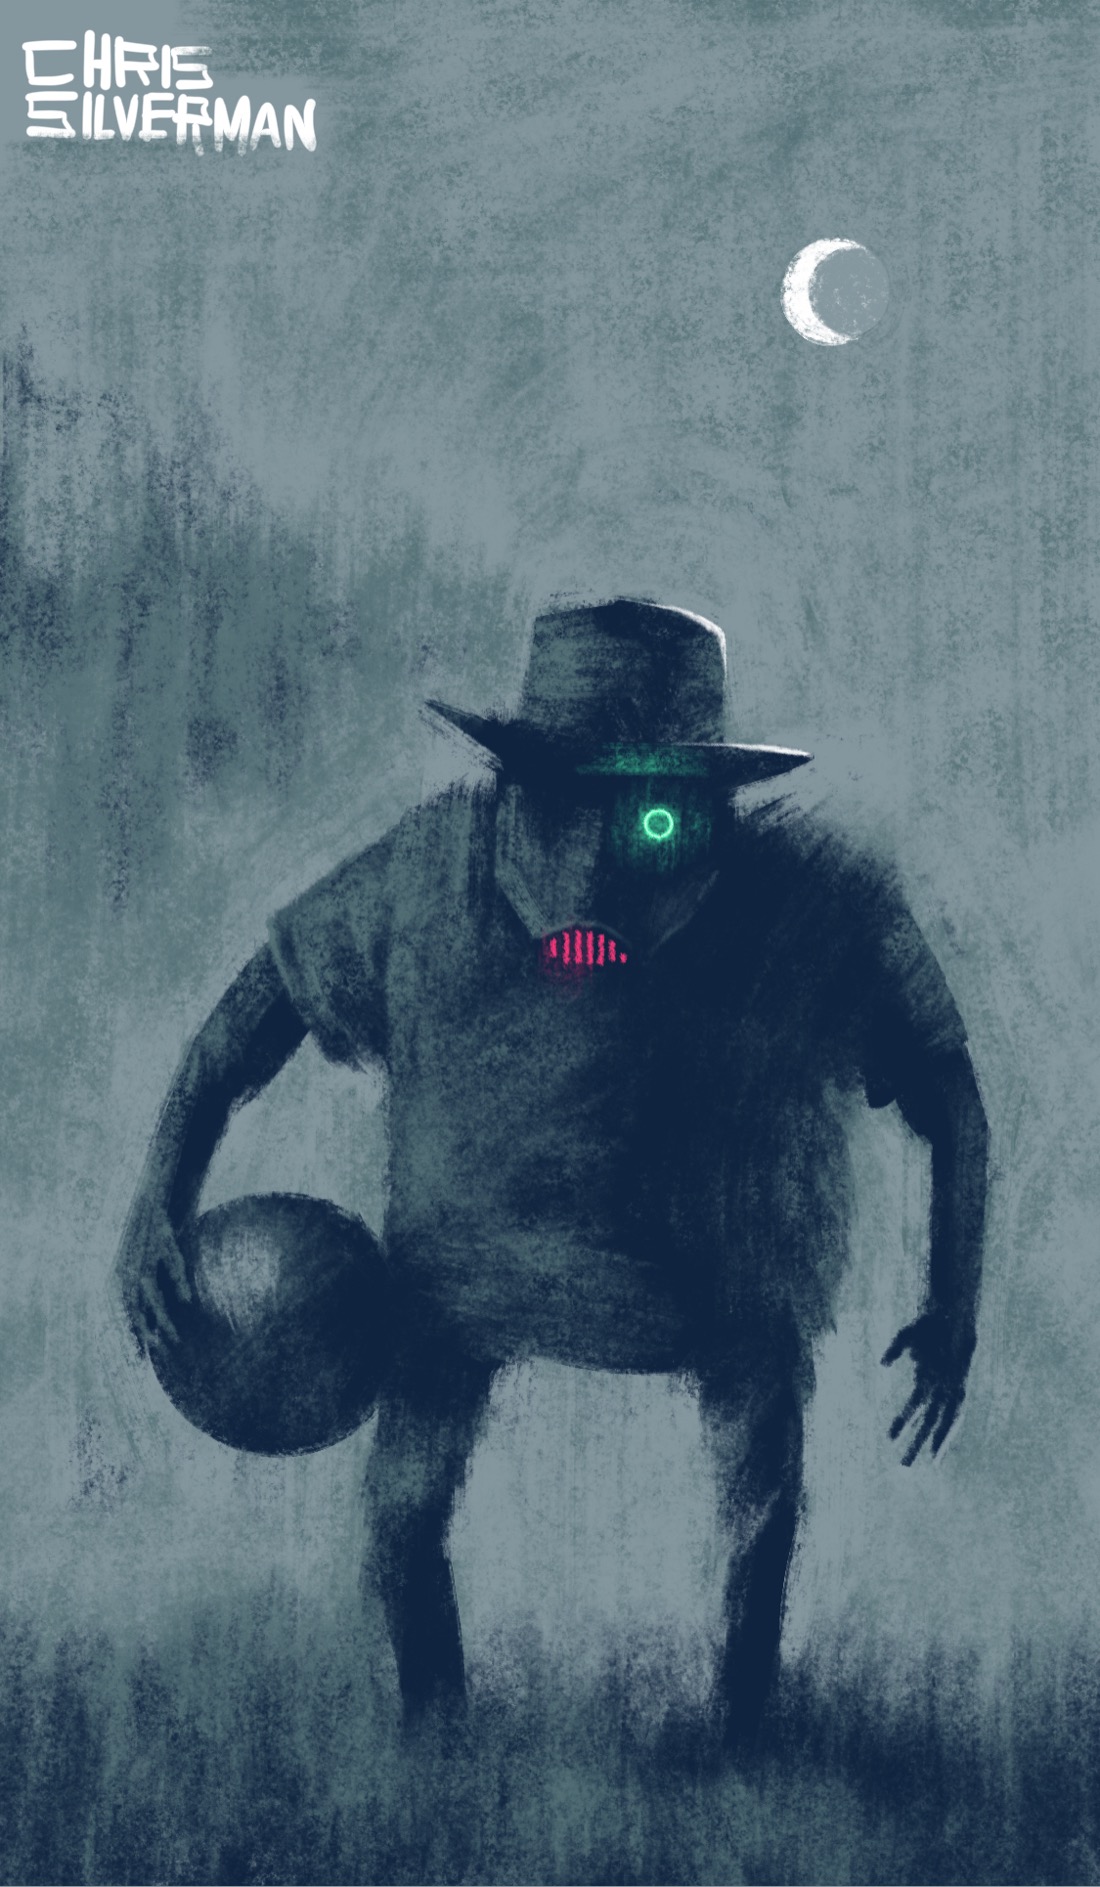 Night, somewhere remote. A white crescent moon hangs in the sky. A squat, hunched-over creature with thin legs wears a fedora and carries a ball under its right arm, staring directly at the viewer. The creature's face is indistinct and oddly featureless, as though it is wearing a mask. The part of its face most in shadow from the hat has a glowing green circle where an eye would be; its mouth is a row of glowing red lines, like a robot's face. It is wearing a baggy T-shirt, and appears to be surrounded by grass, with a blurry suggestion of trees in the distance. This is a dark gray drawing, with the only color being the glowing green eye and red mouth.